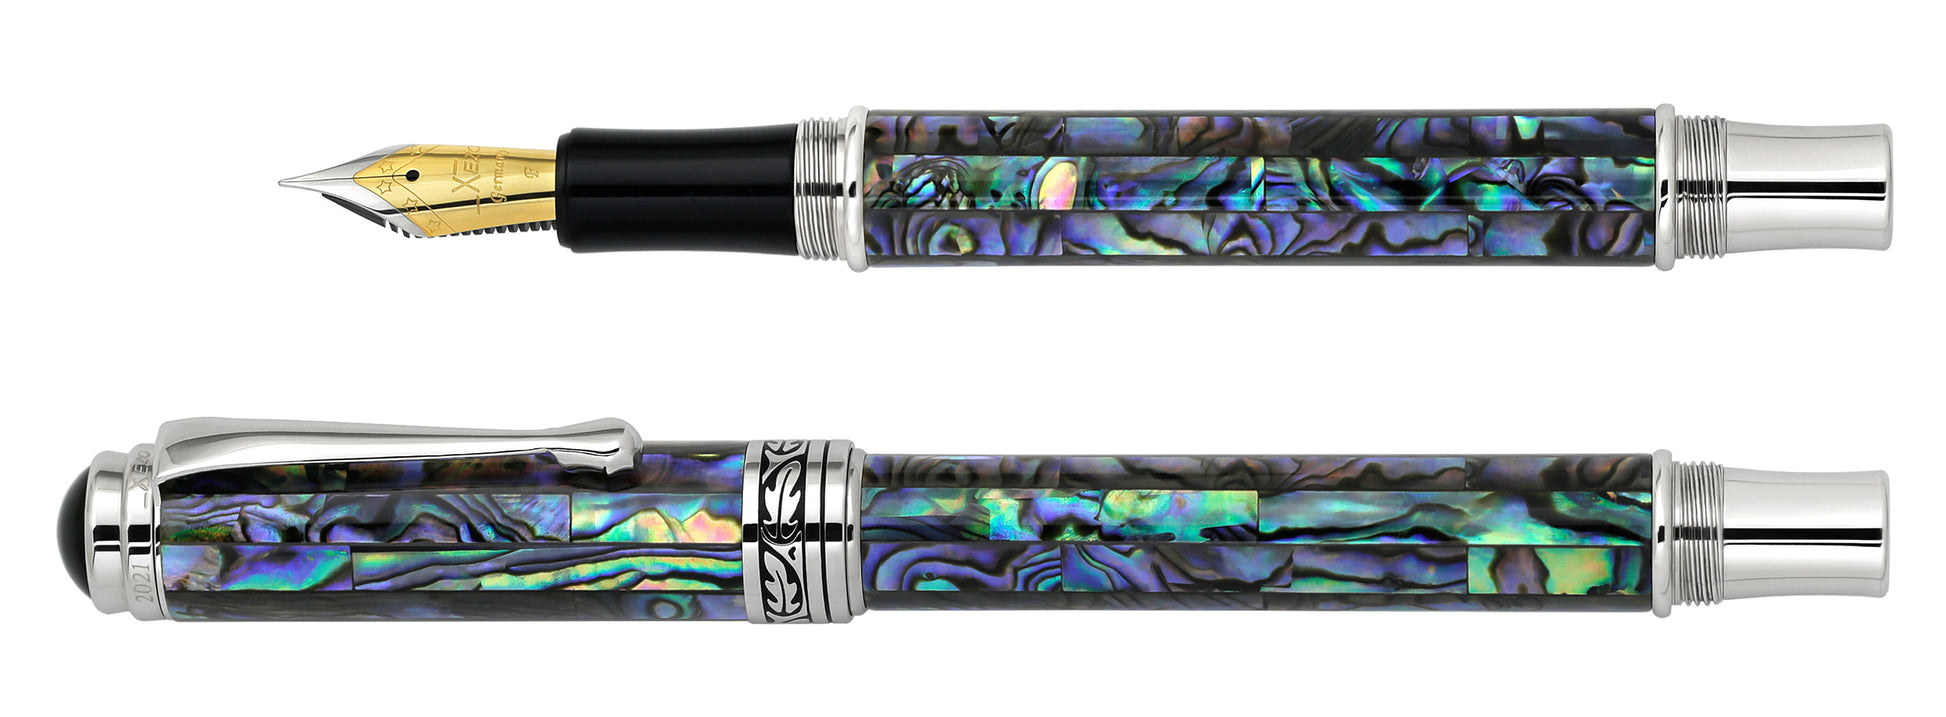 Xezo - Horizontal view of two Maestro Sea Shell FP-2 fountain pens, one without a cap and one that is capped